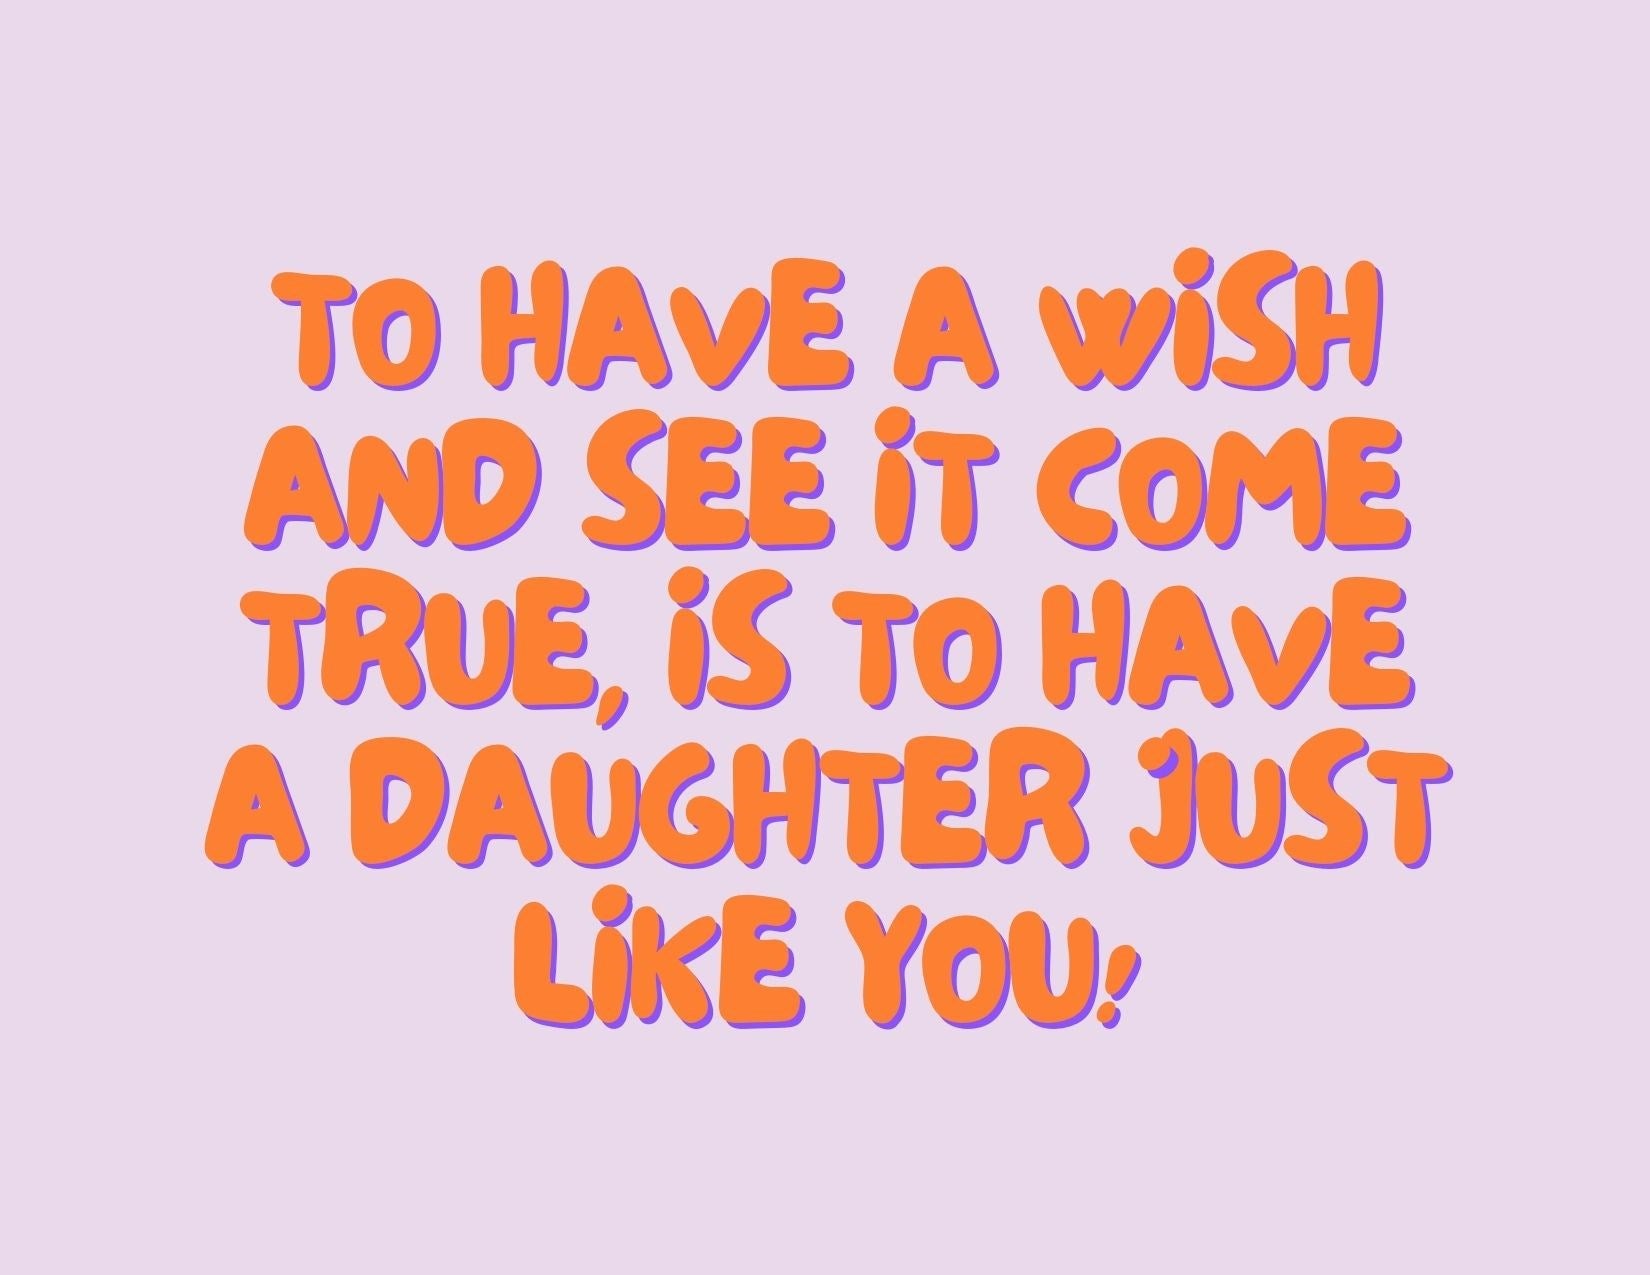 TO HAVE A WISH AND SEE IT COME TRUE IS TO HAVE DAUGHTER JUST LIKE YOU